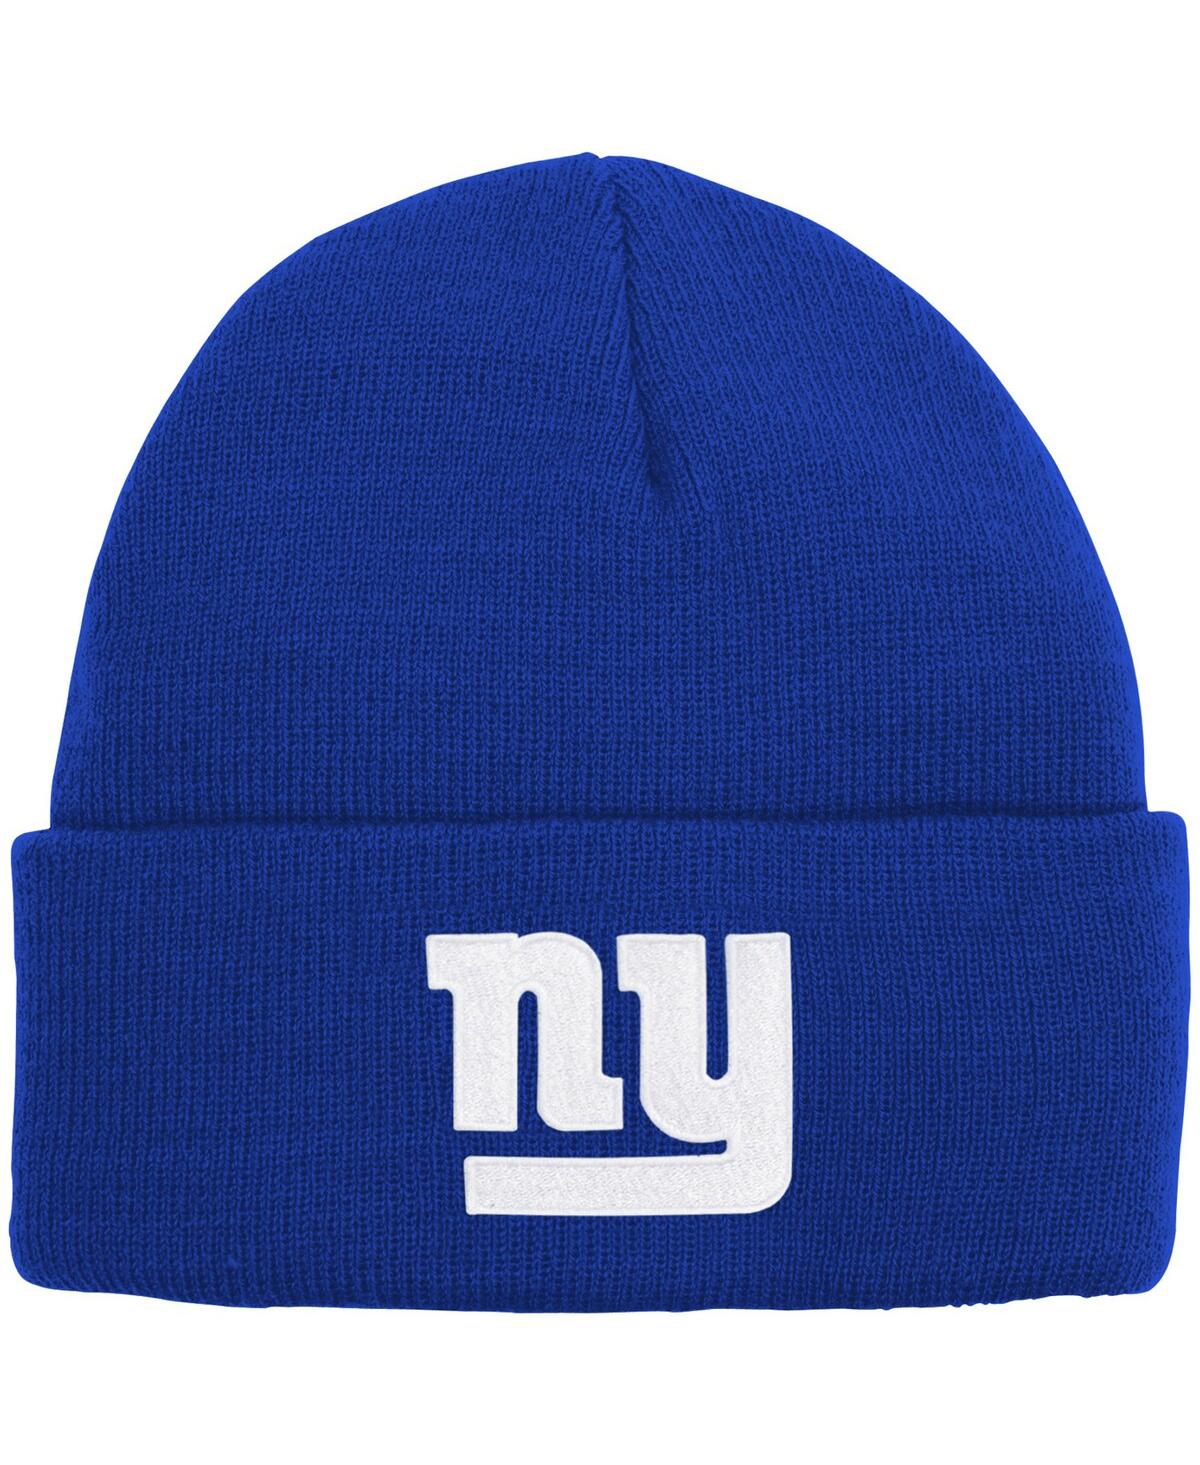 Outerstuff Kids' Big Boys And Girls Royal New York Giants Basic Cuffed Knit Hat